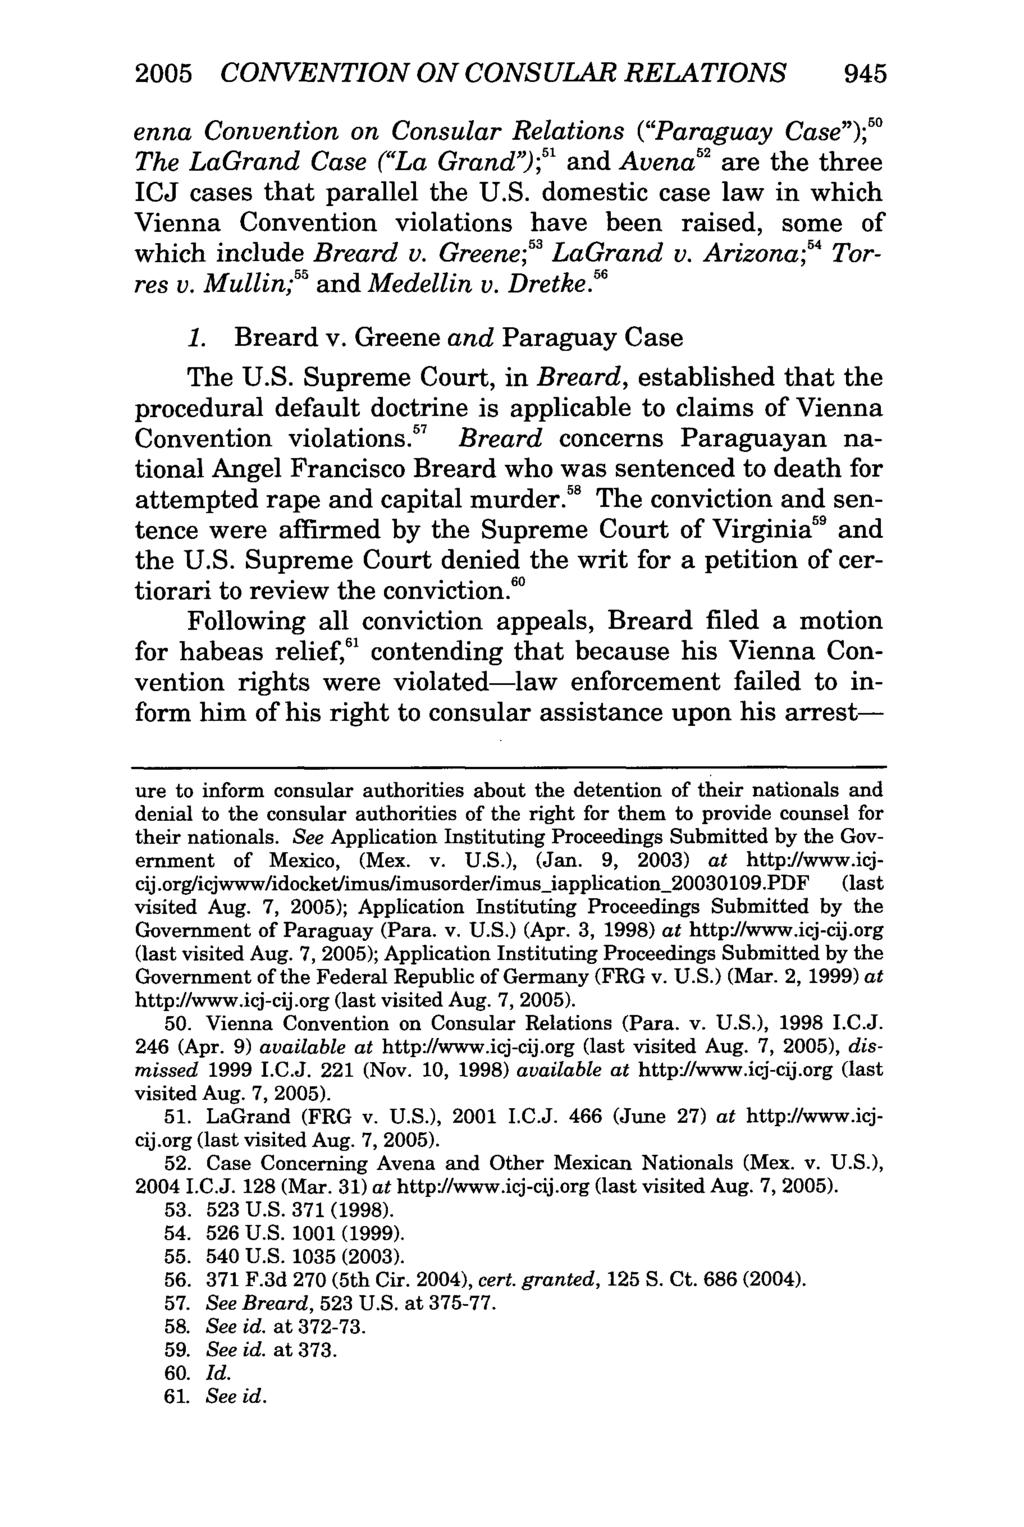 2005 CONVENTION ON CONSULAR RELATIONS 945 enna Convention on Consular Relations ("Paraguay Case"); The LaGrand Case ("La Grand"); 5 and Avena 2 are the three ICJ cases that parallel the U.S. domestic case law in which Vienna Convention violations have been raised, some of which include Breard v.